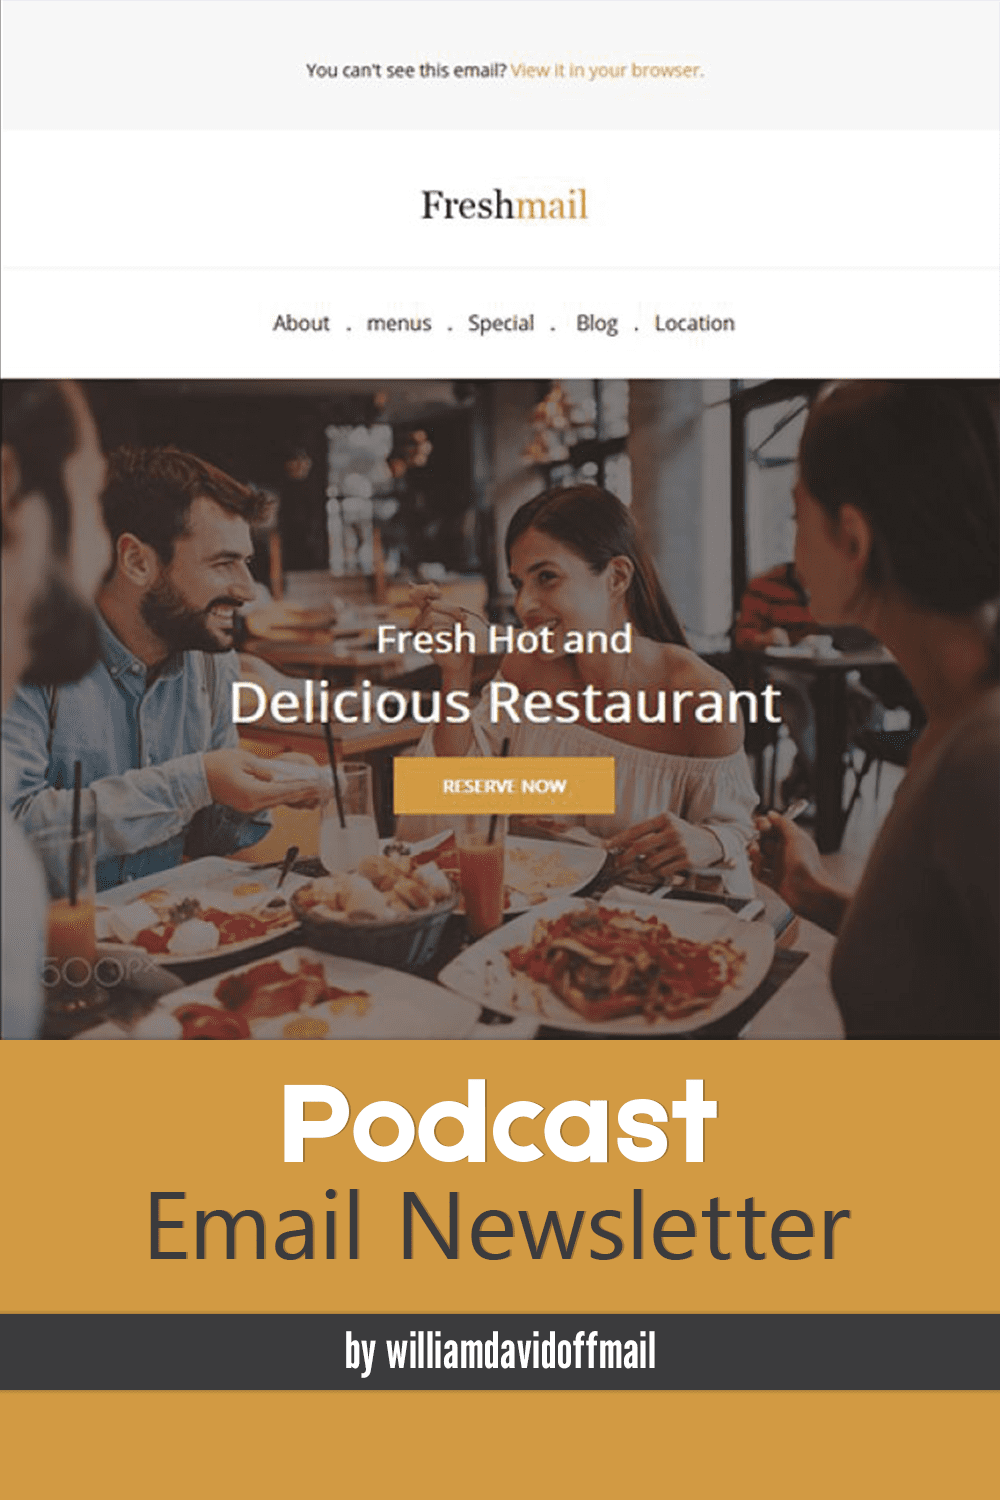 Image usability email design template for restaurant business.